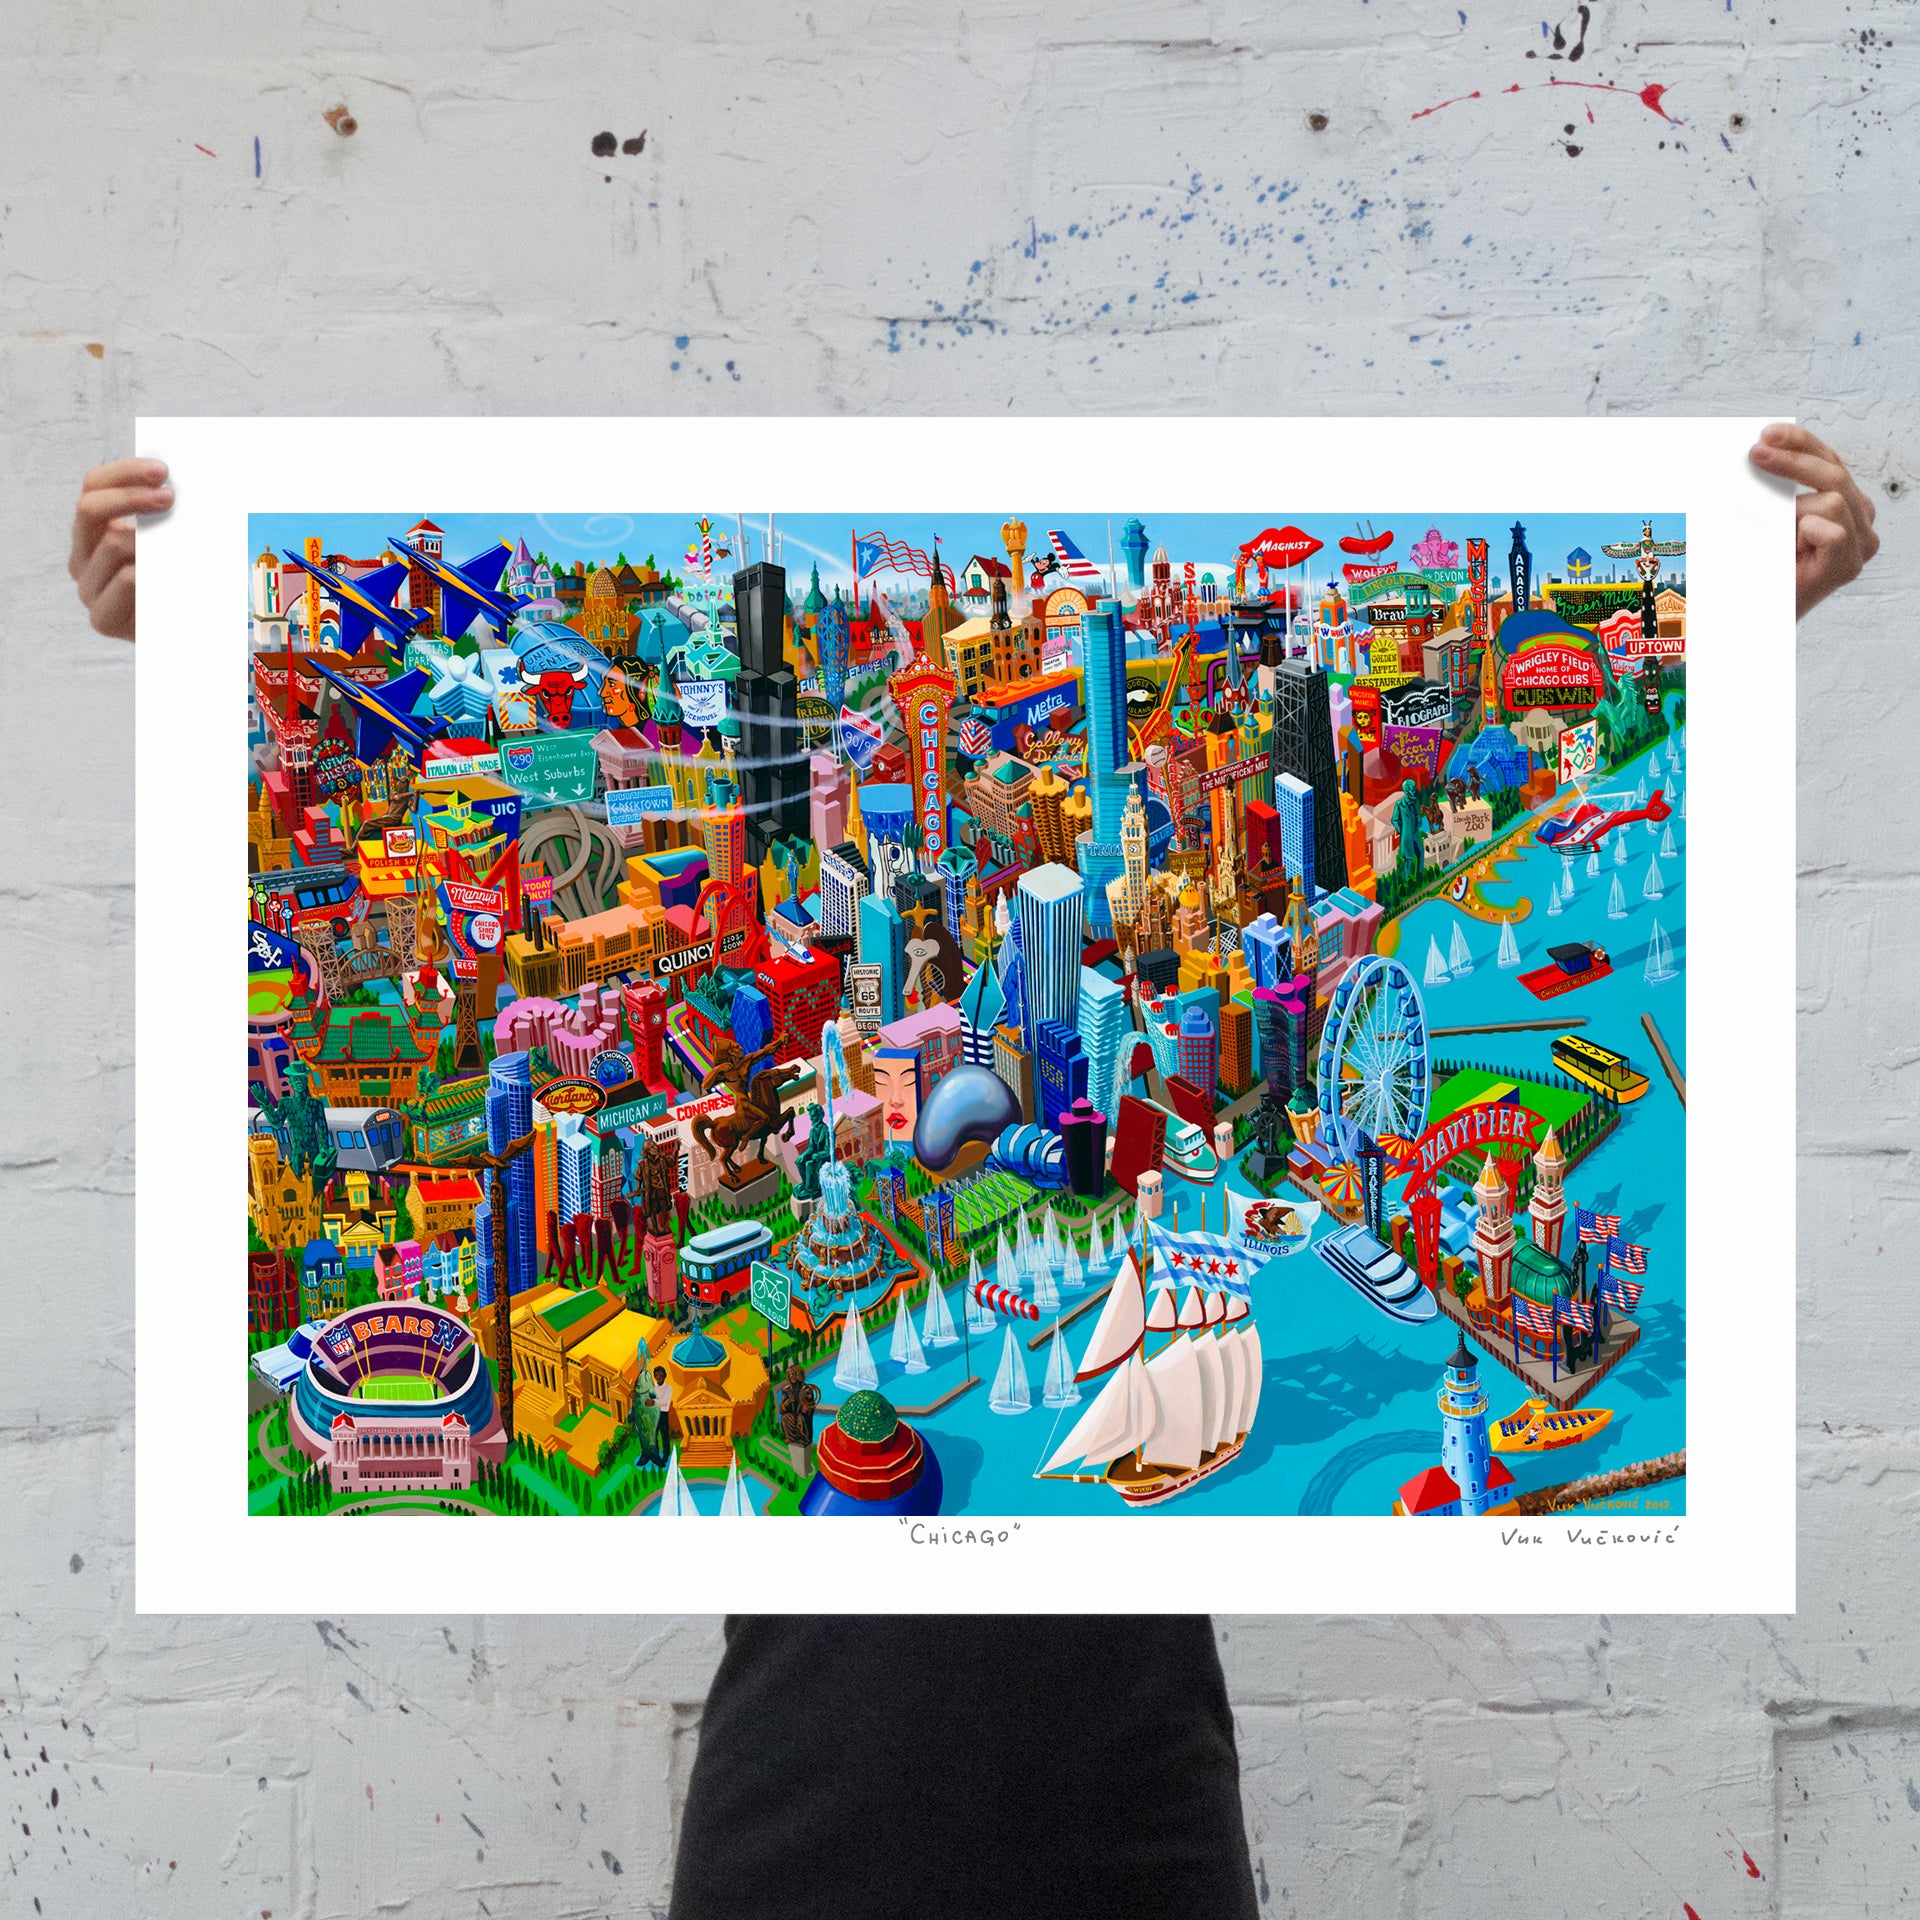 Chicago - print on paper 24x32"